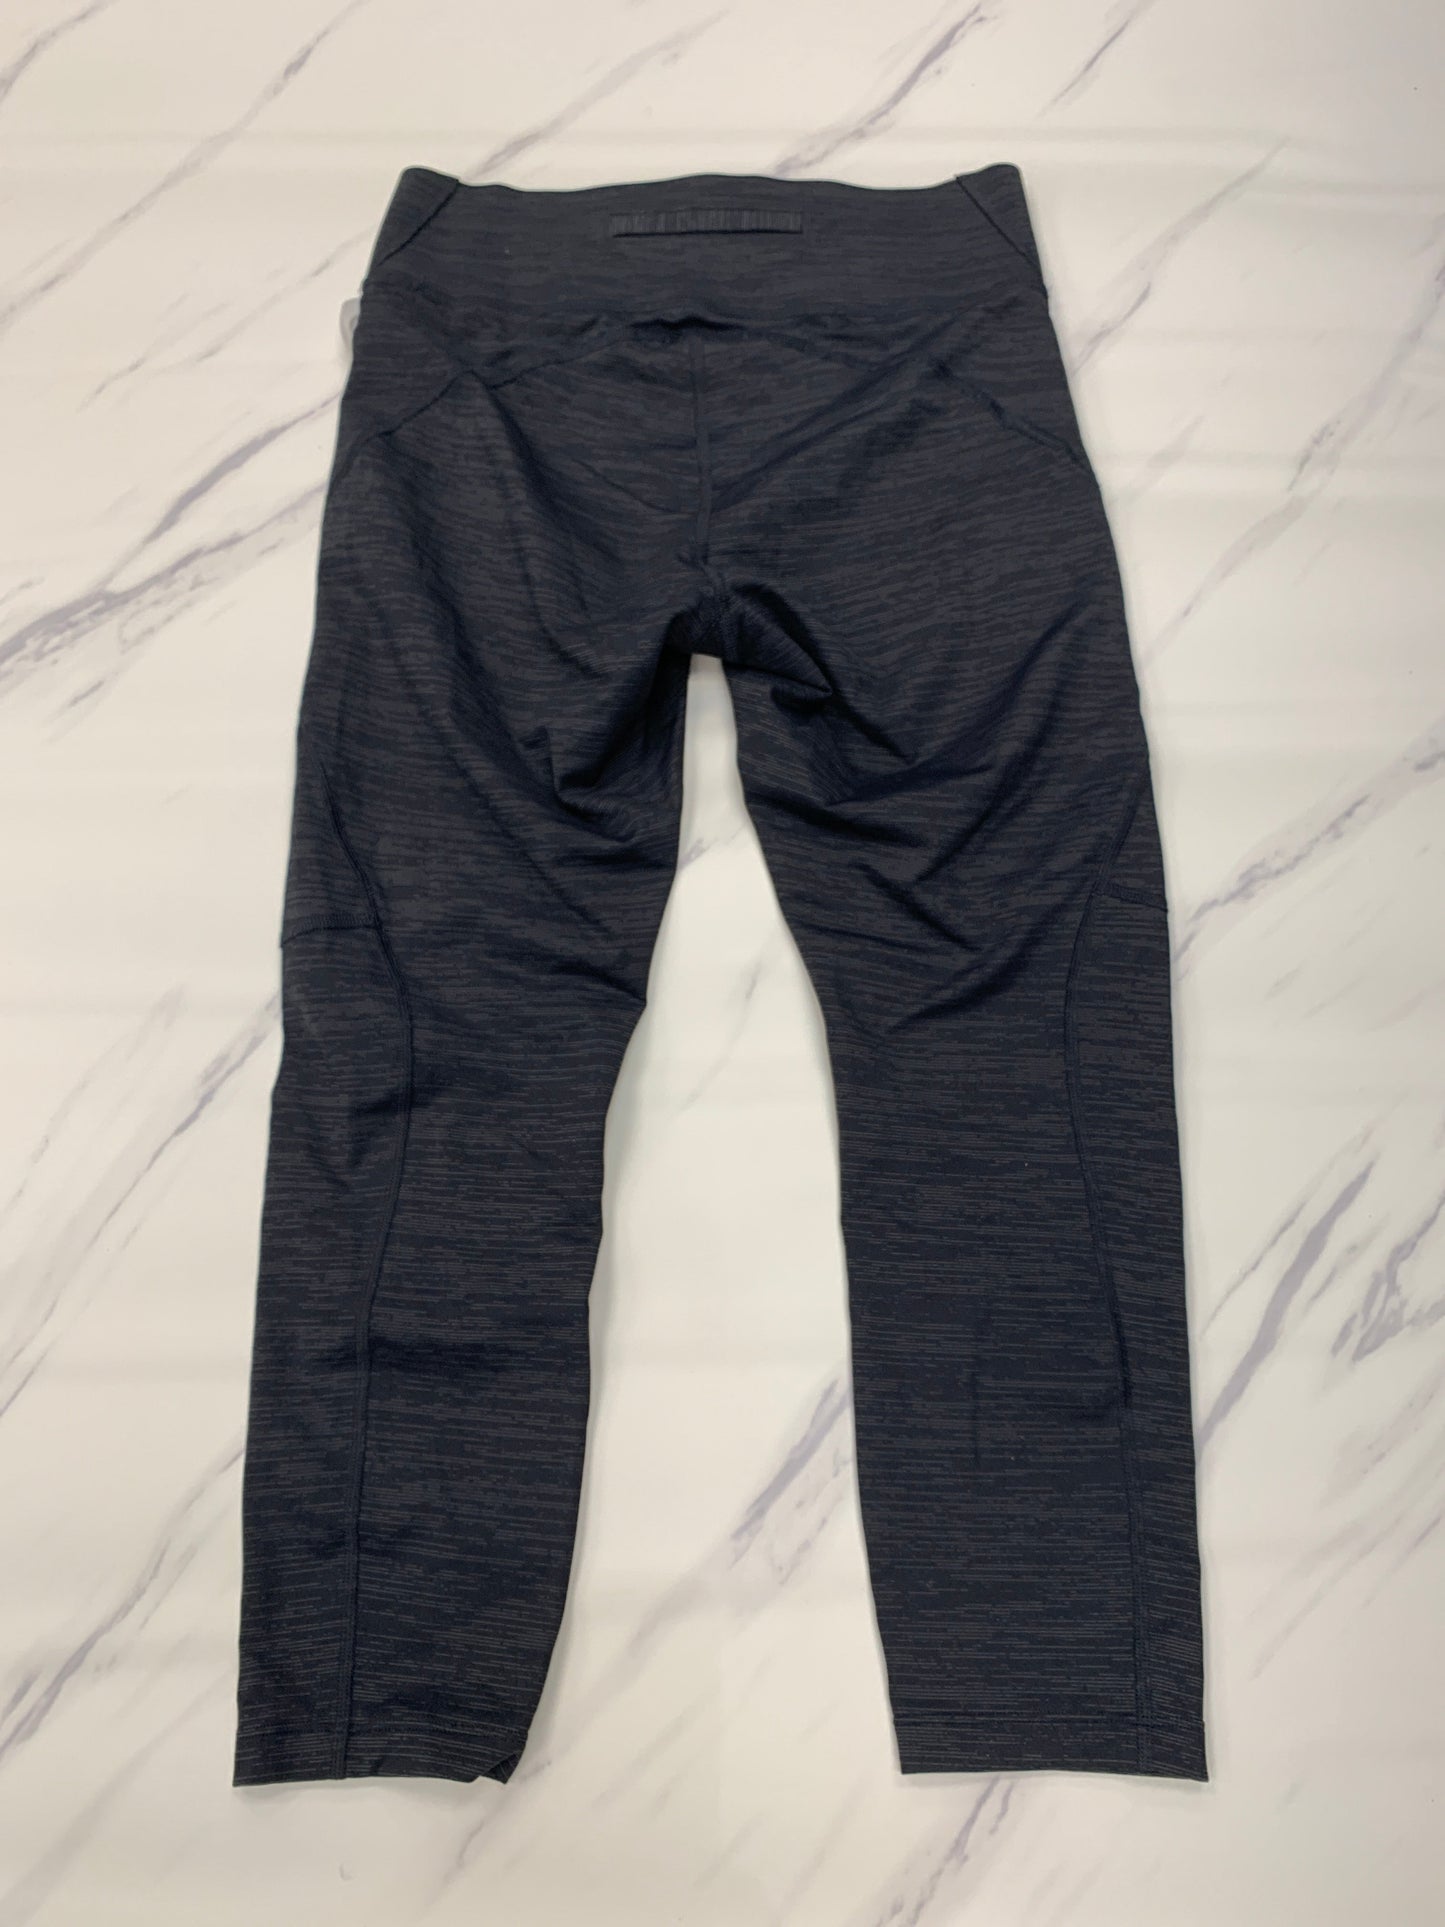 Athletic Leggings By Outdoor Voices  Size: M